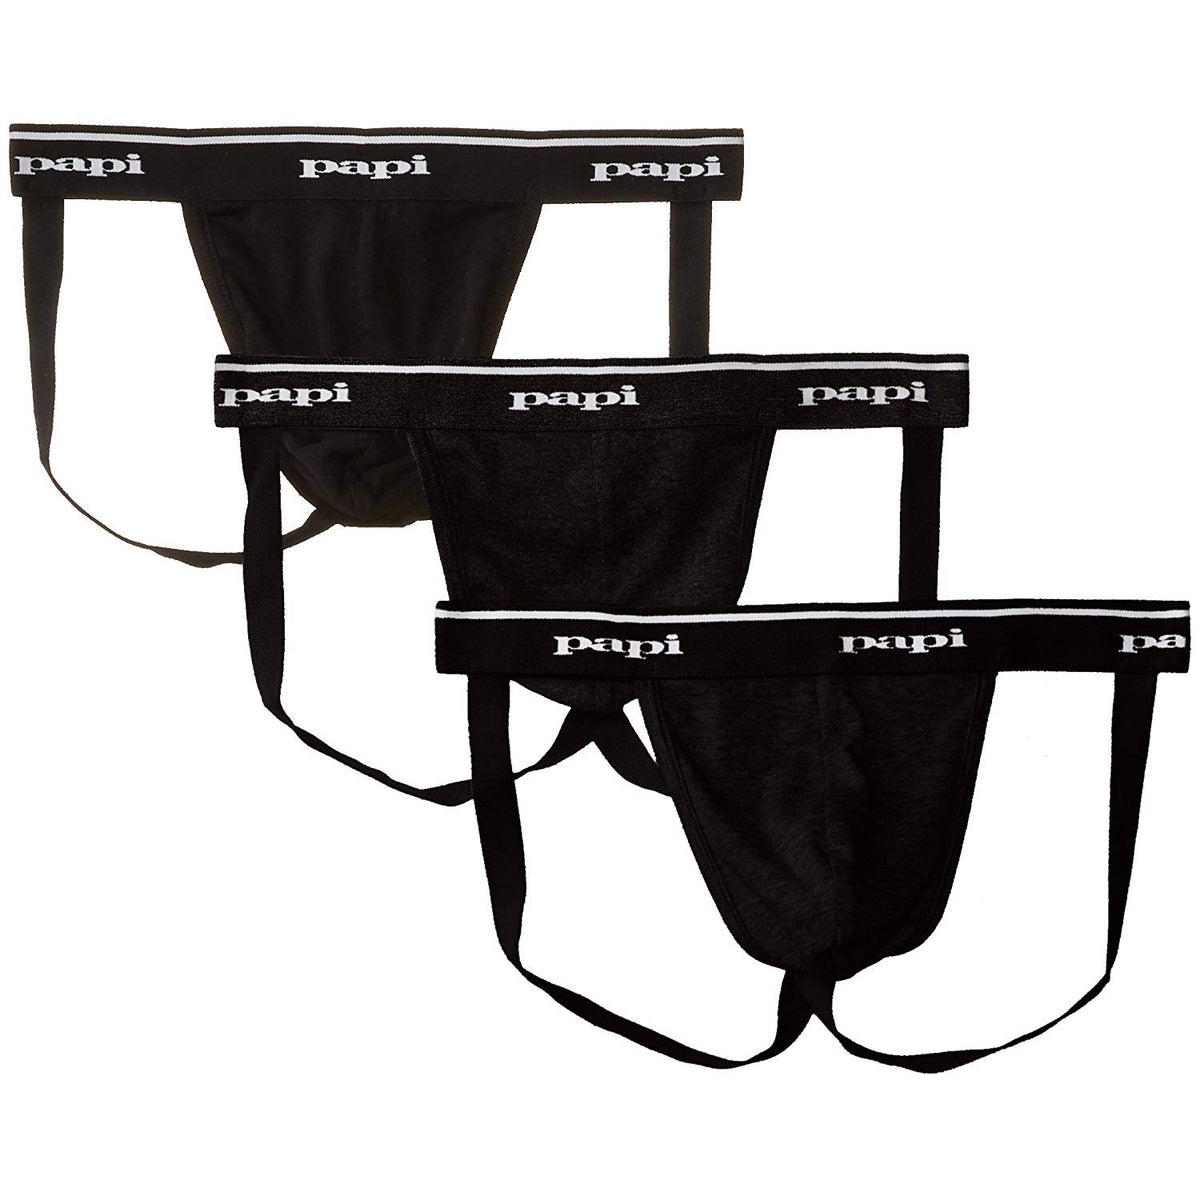  papi Stylish Brazilian Solid and Print Trunks (3-Pack of Men's  Underwear), Black/Black/Black, Small : Clothing, Shoes & Jewelry